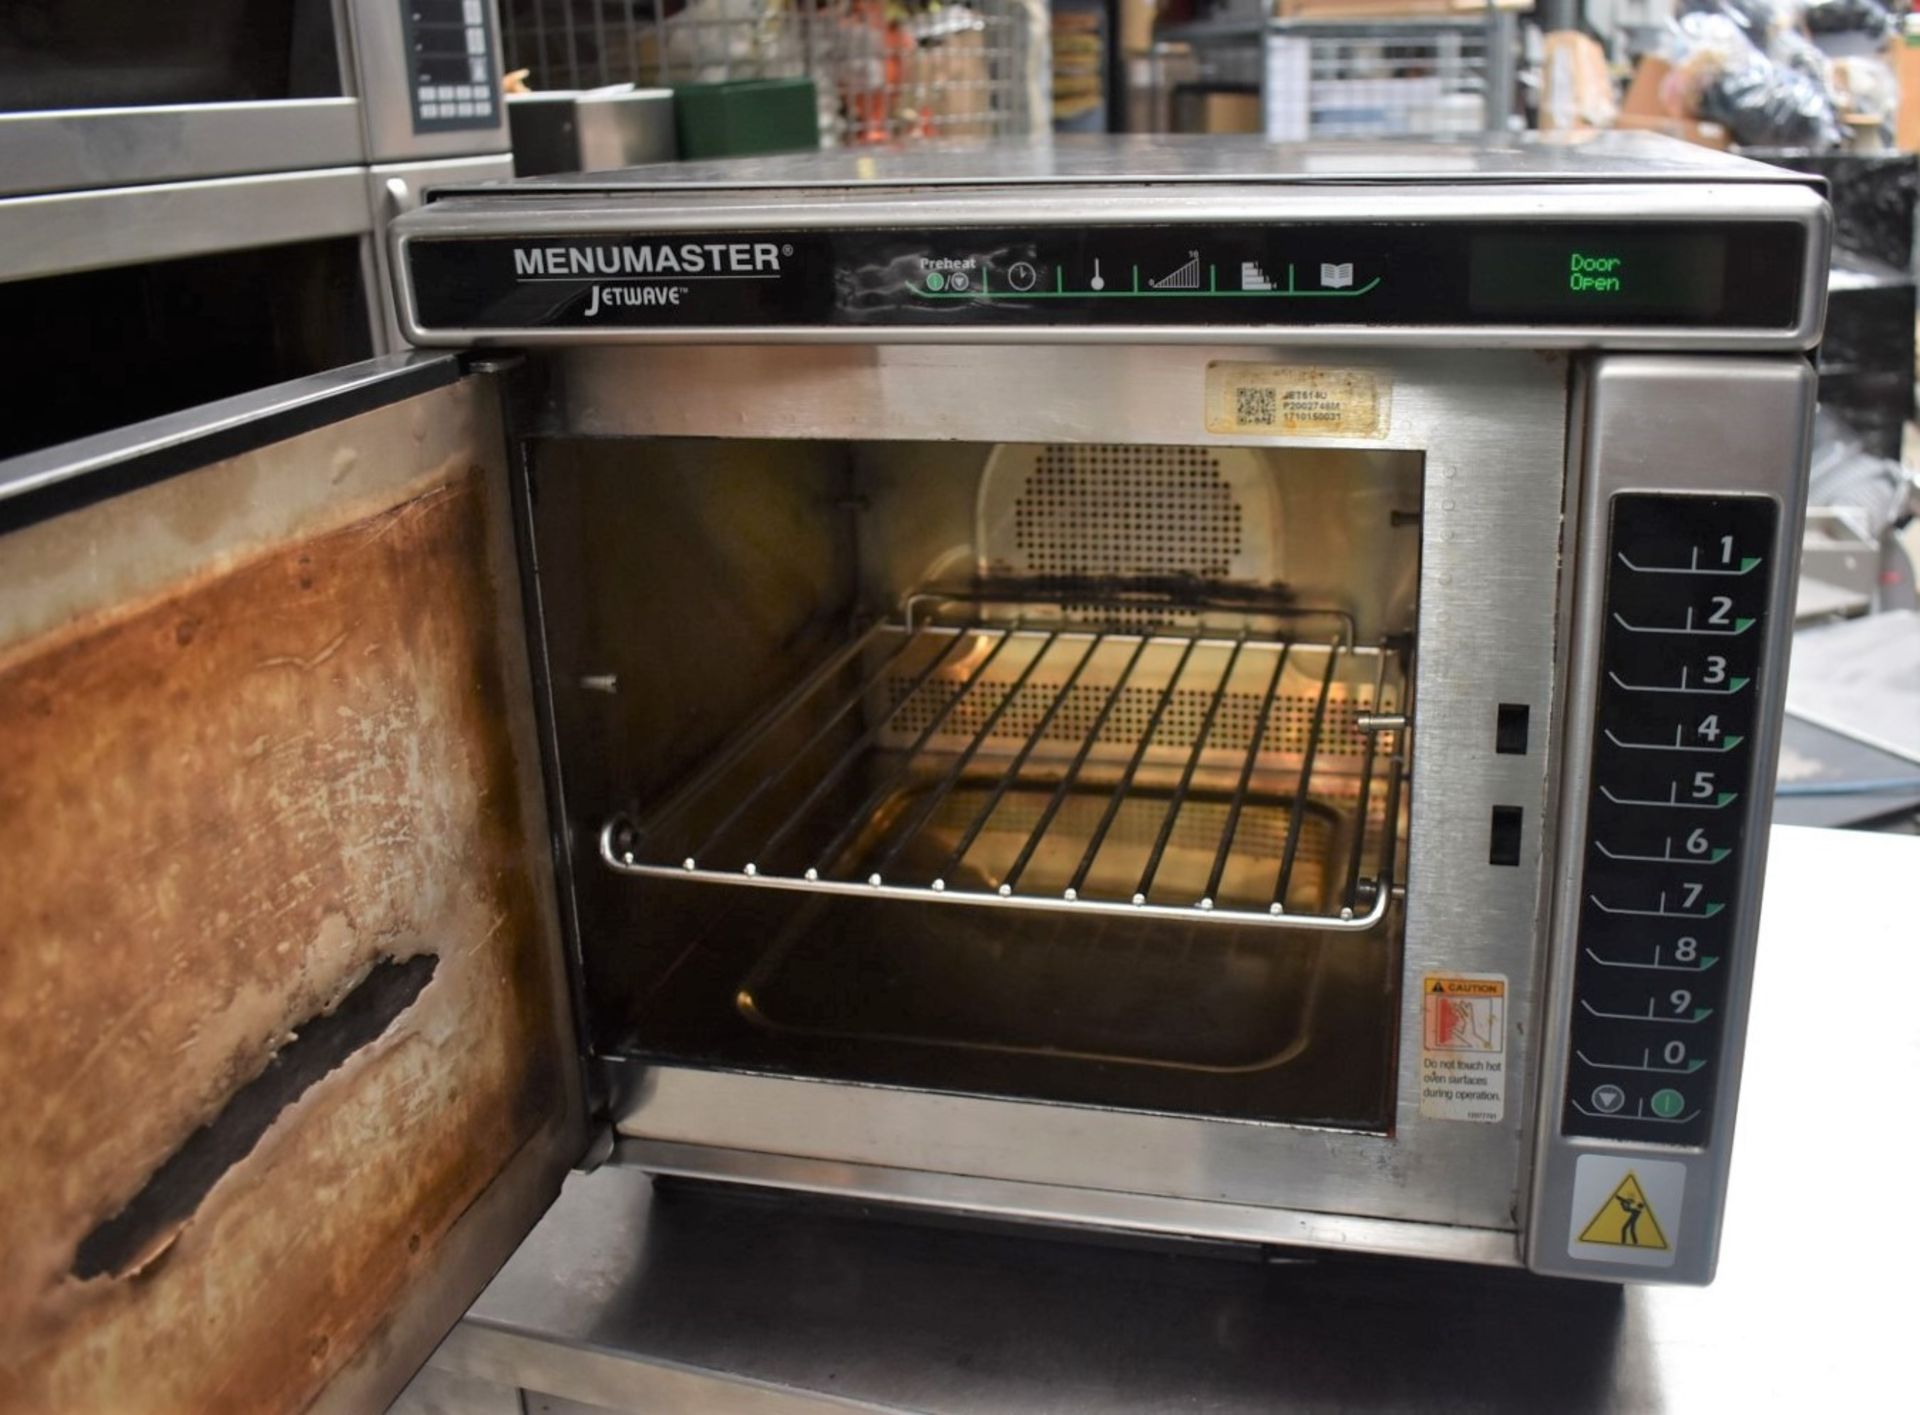 1 x Menumaster Jetwave JET514U High Speed Combination Microwave Oven - RRP £2,400 - Manufacture - Image 4 of 11